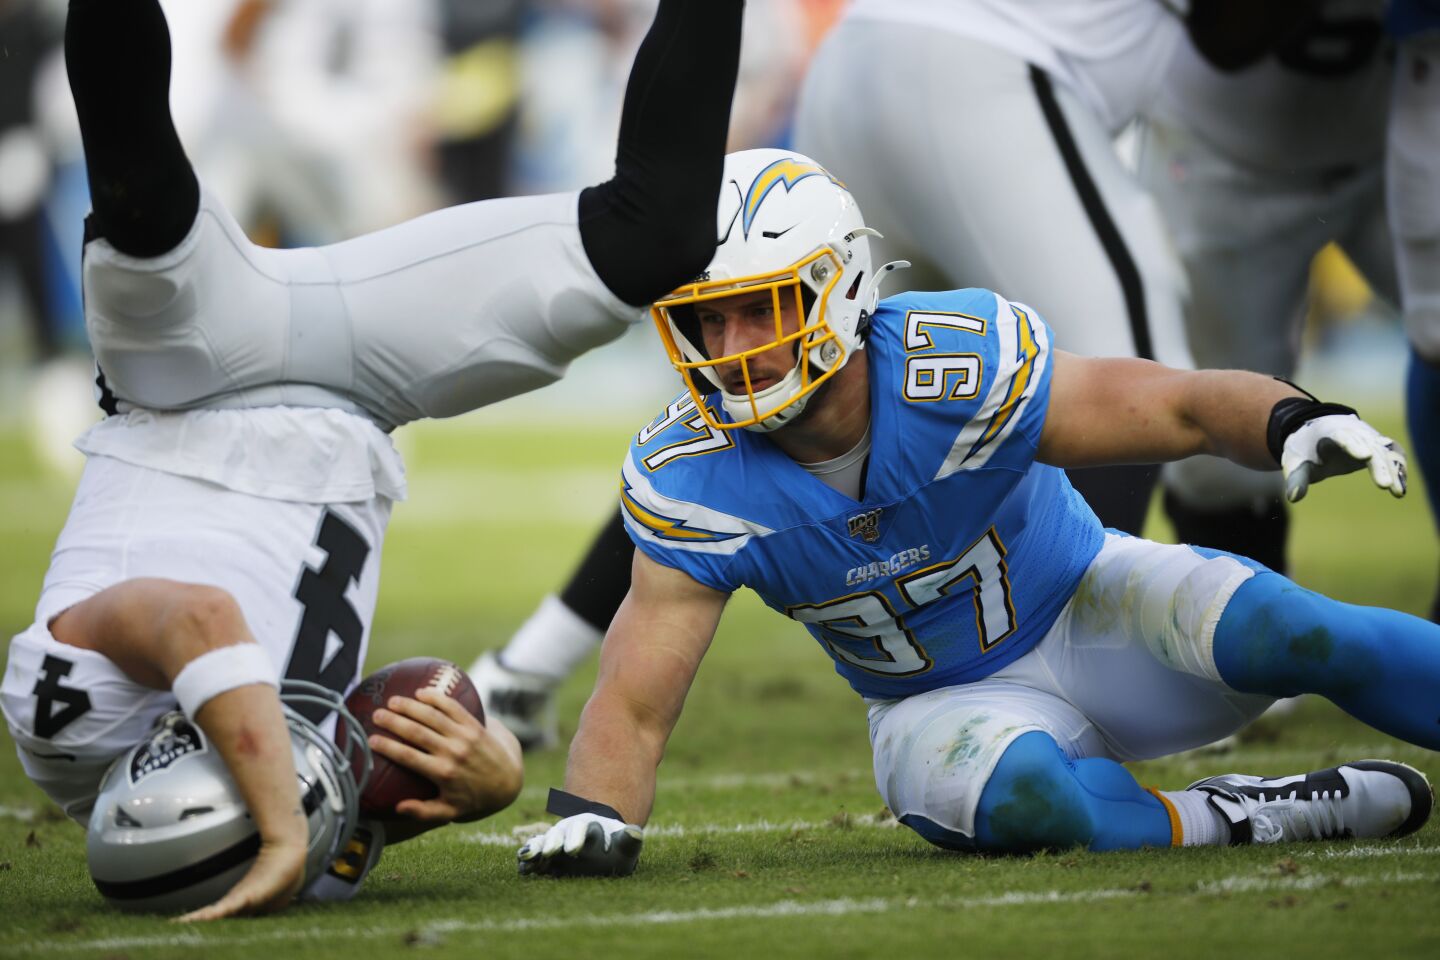 Oakland Raiders Derek Carr is hit by Chargers defensive end Joey Bosa during the second quarter.